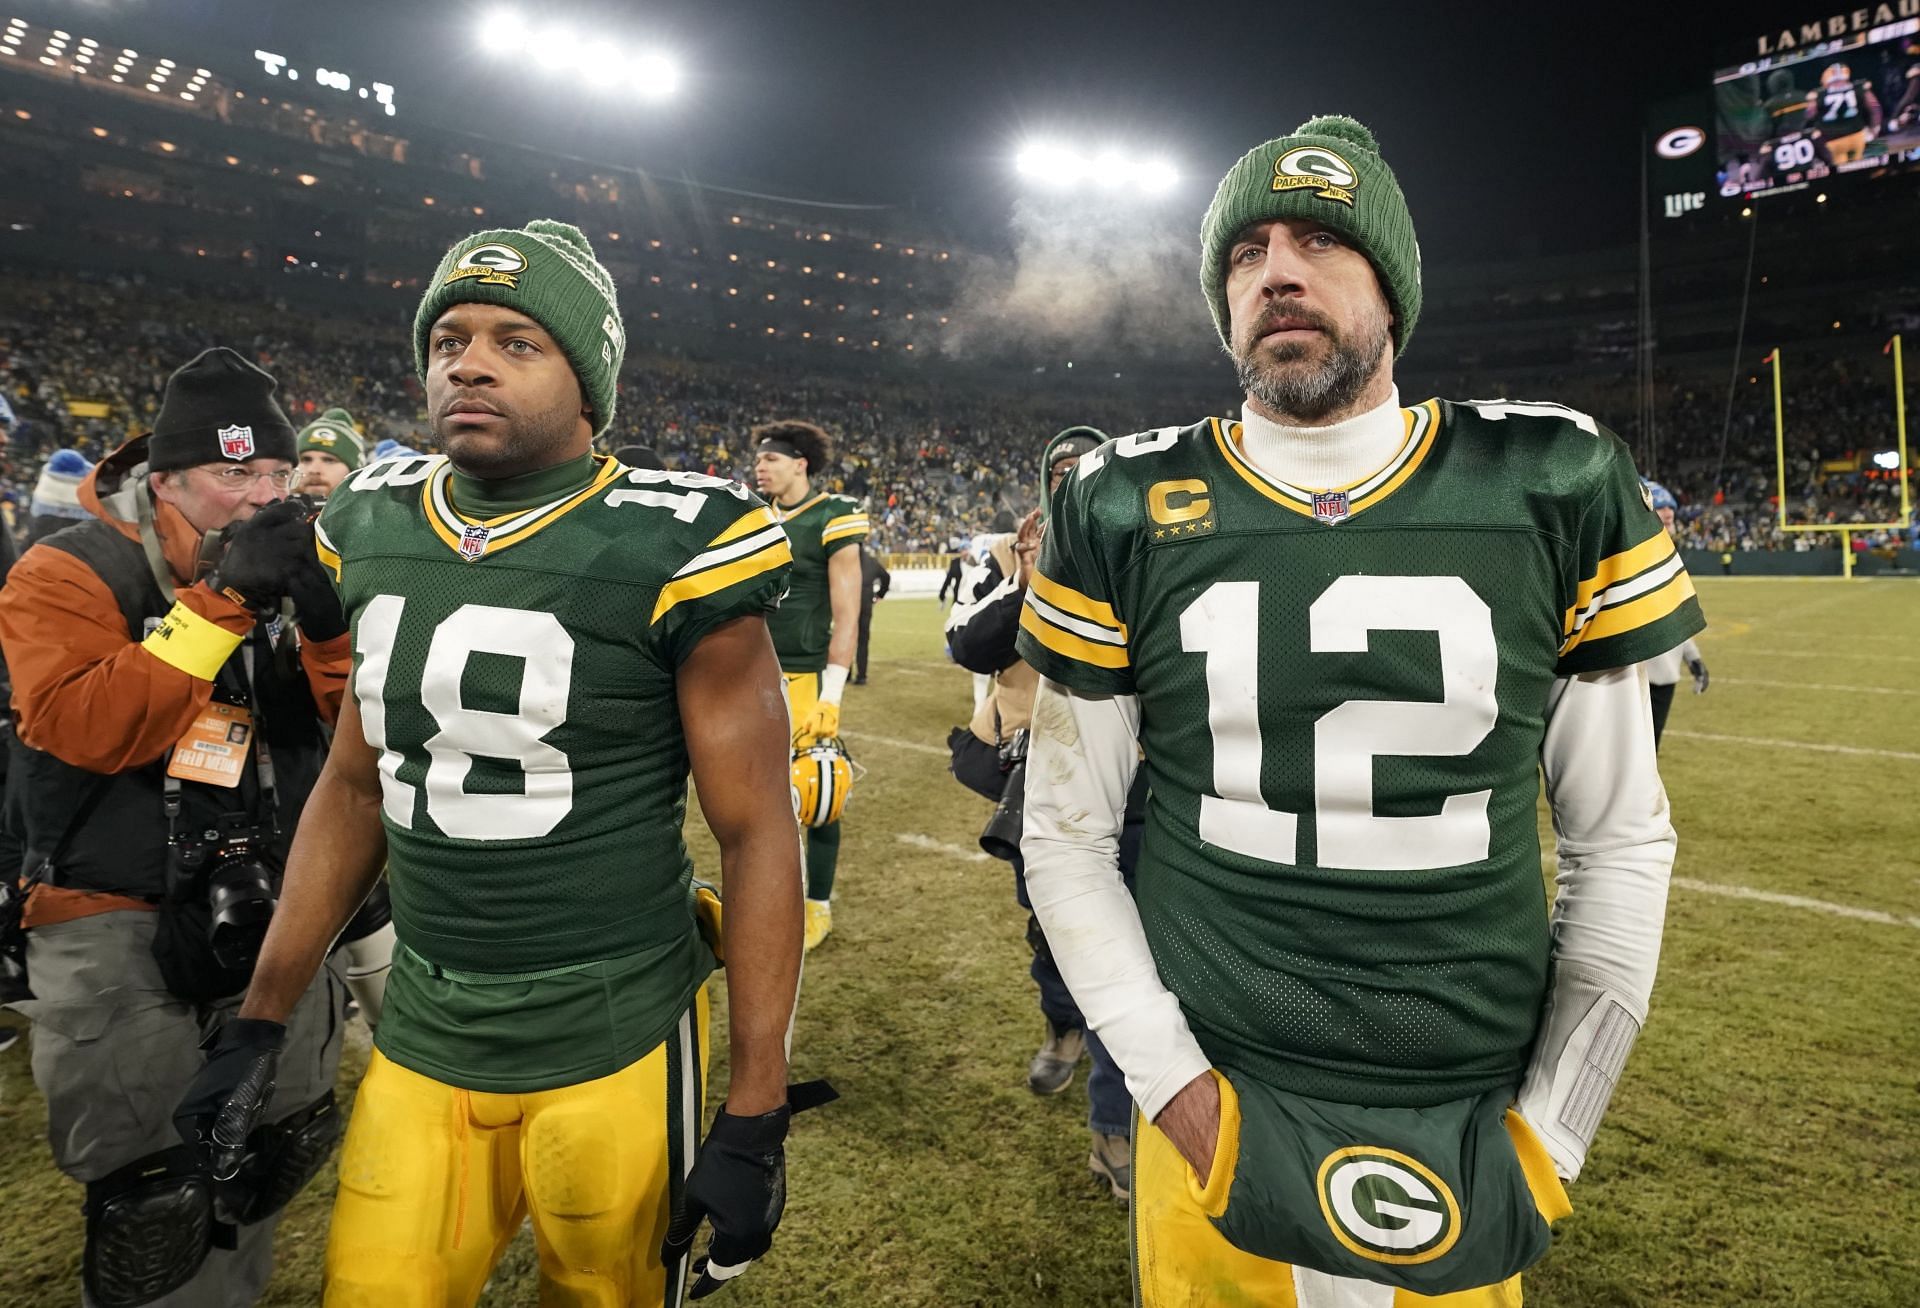 Aaron Rodgers in Detroit Lions v Green Bay Packers game